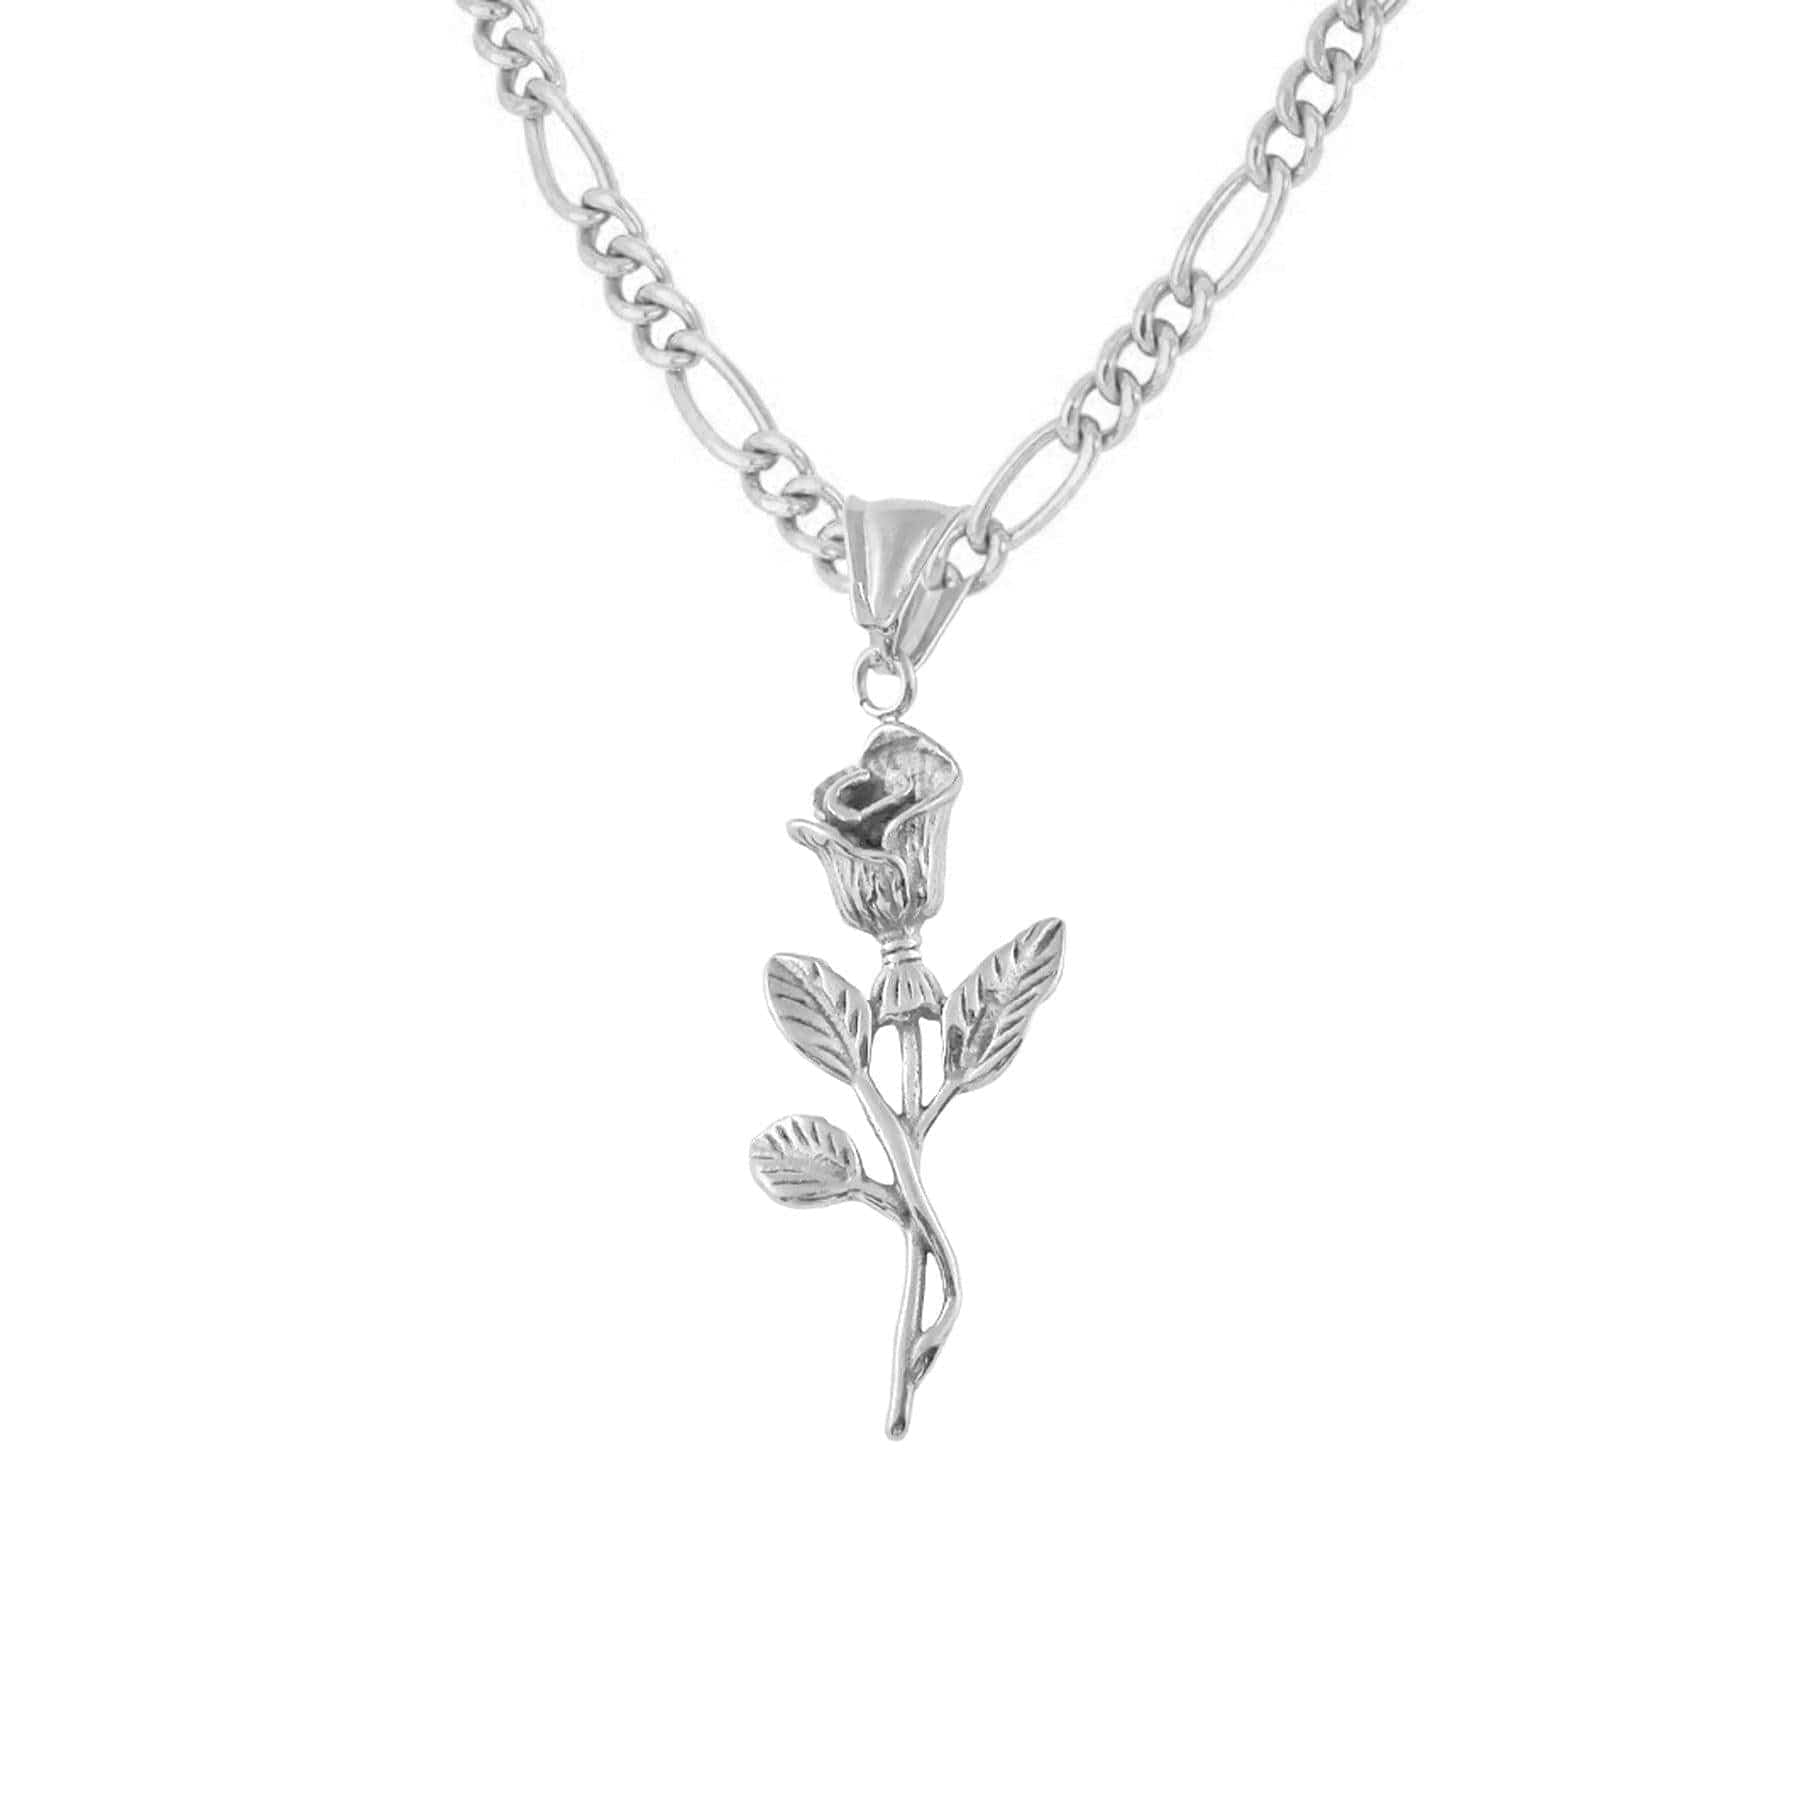 BohoMoon Stainless Steel Rosemary Necklace Silver